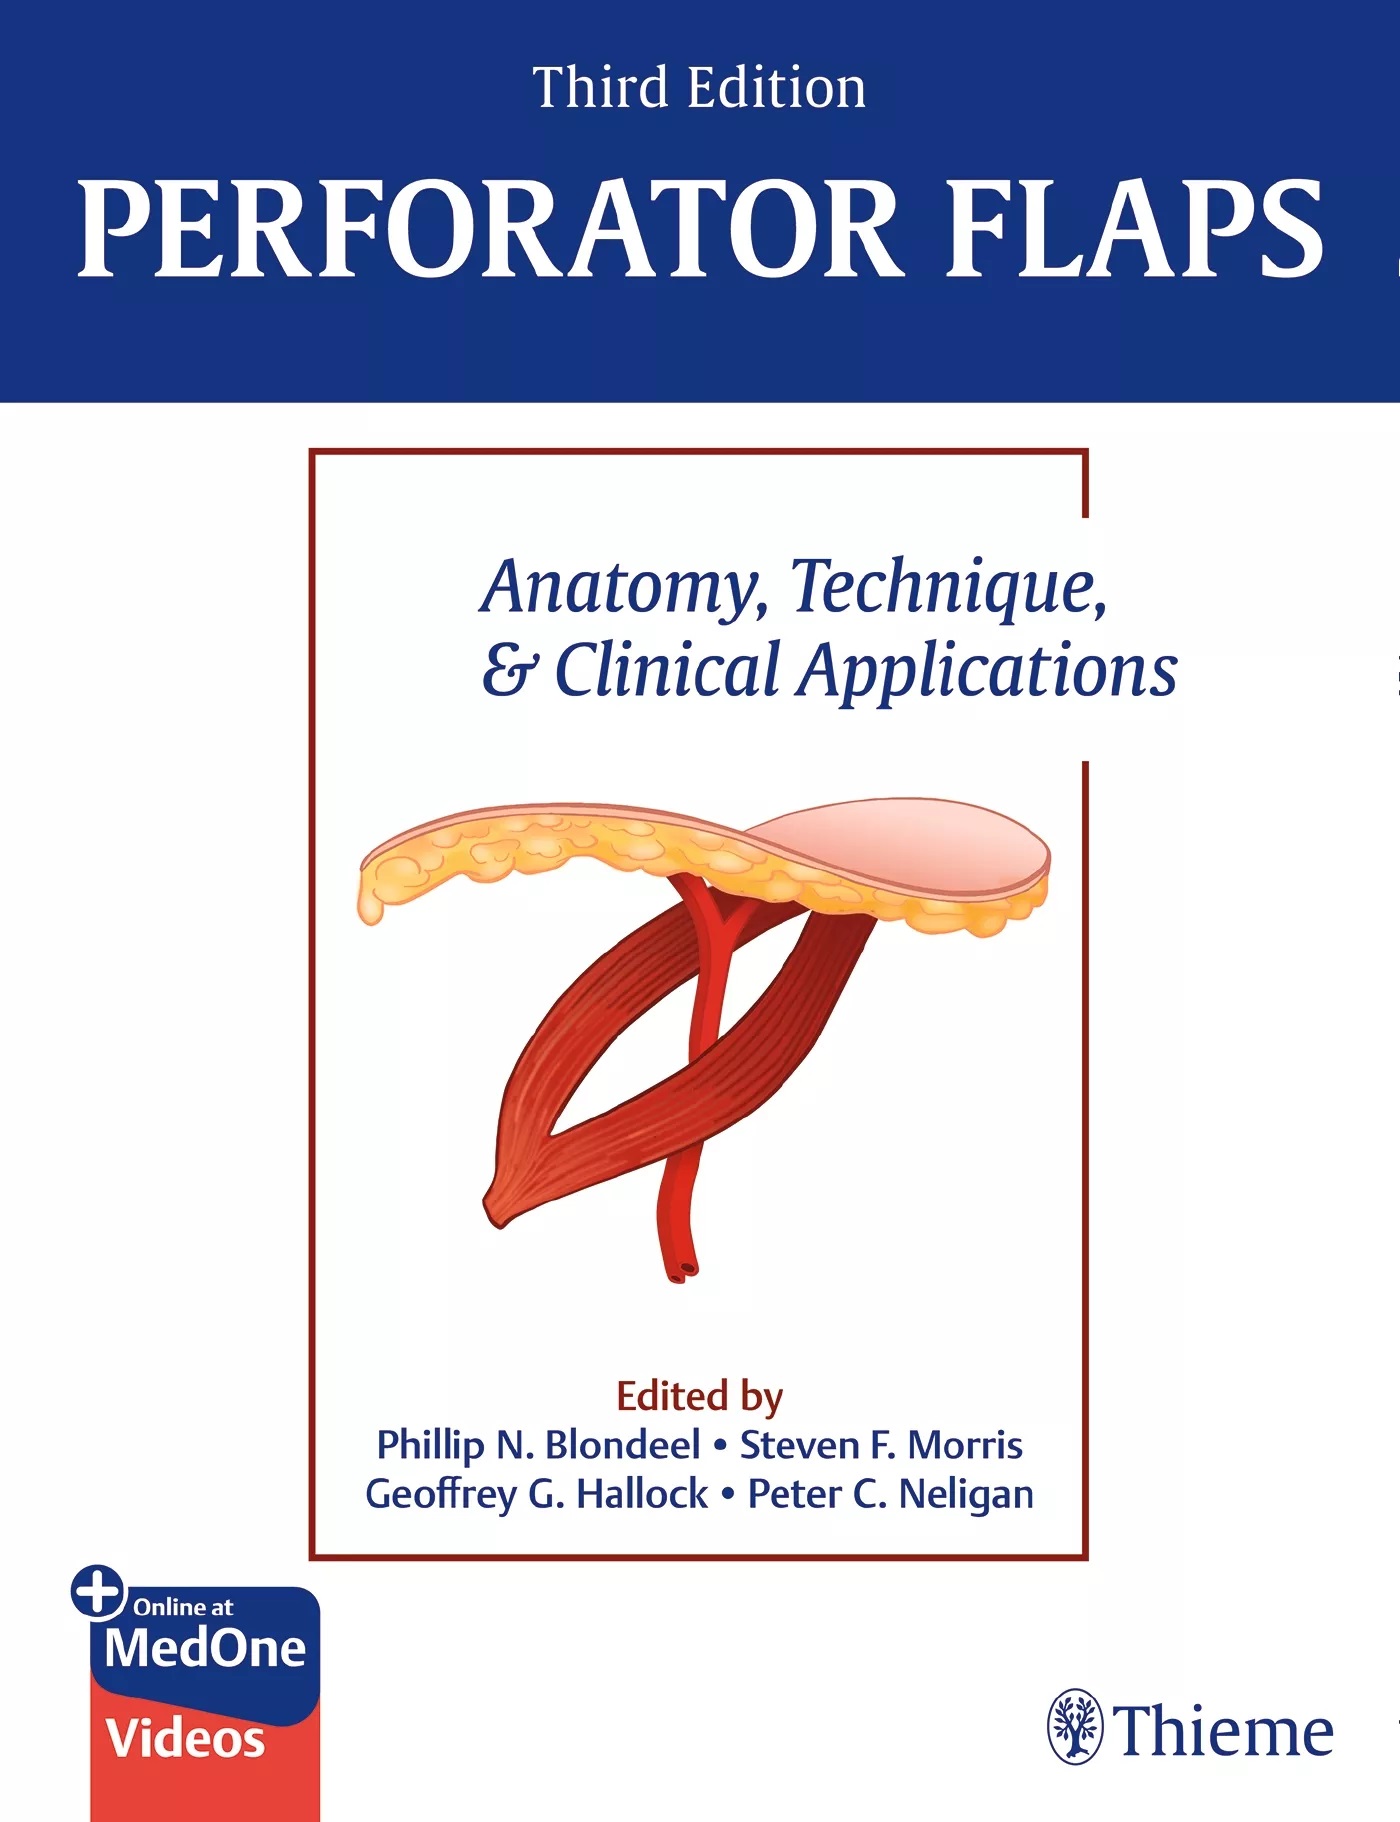 Perforator Flaps, 3rd ed.- Anatomy, Technique & Clinical Applications